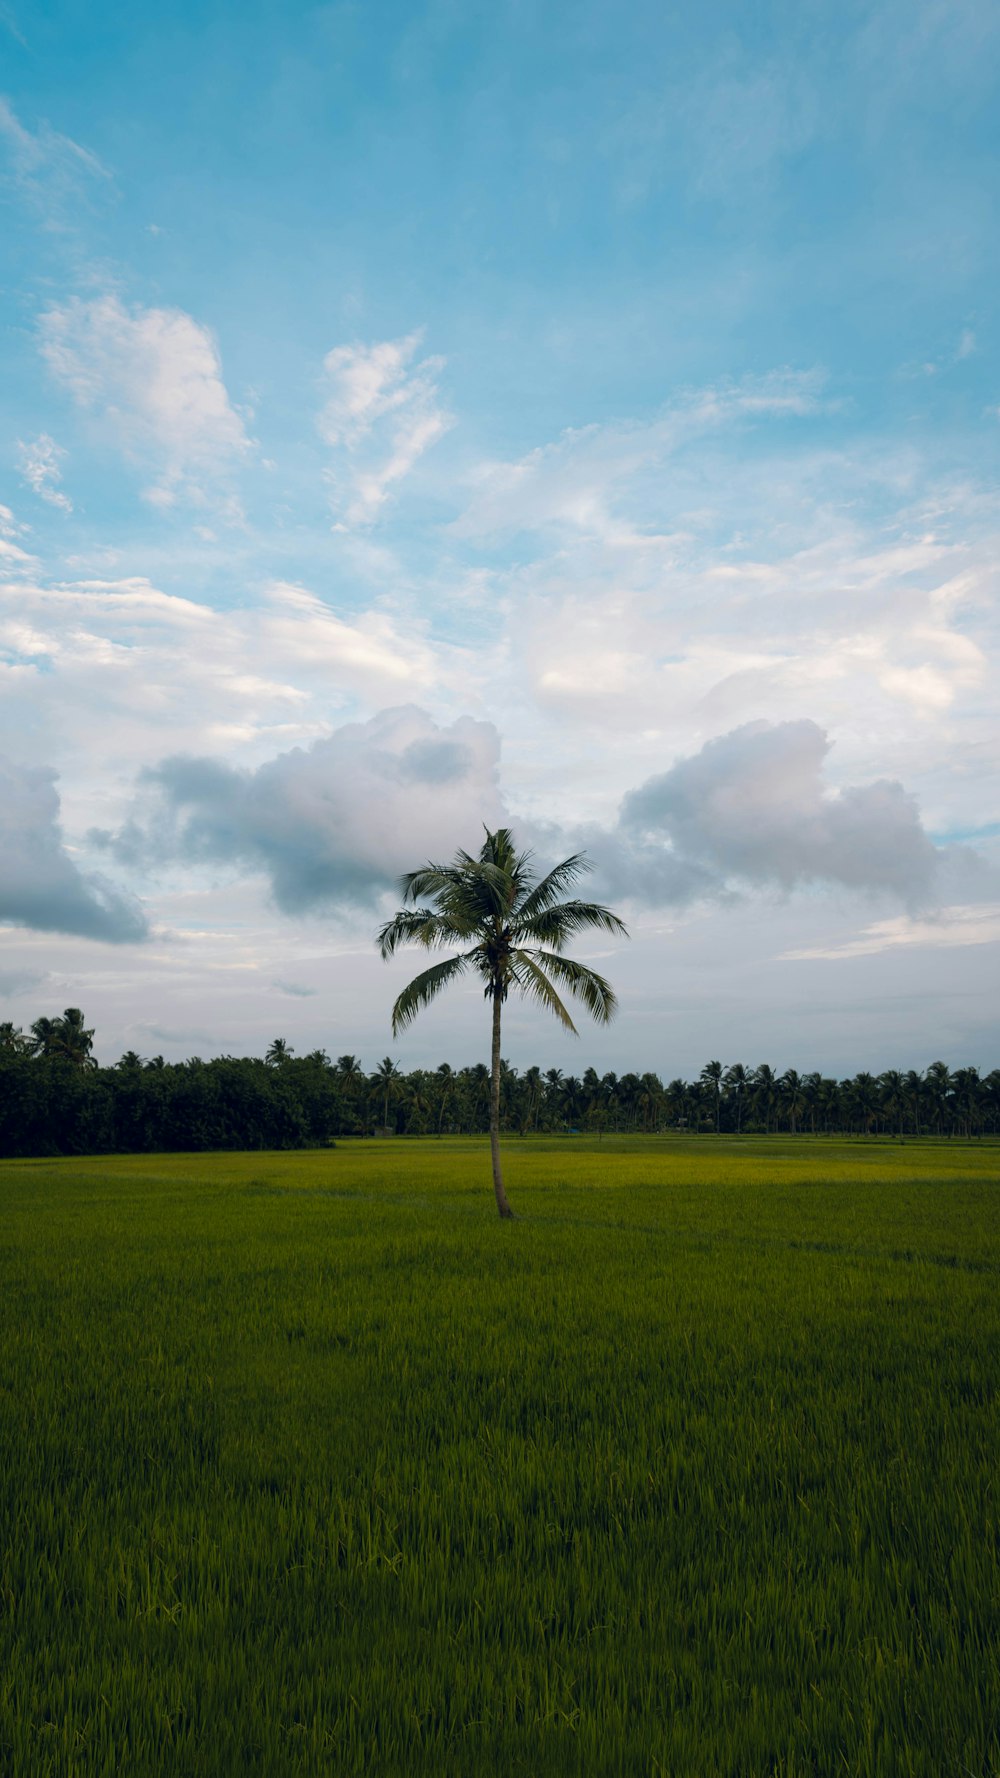 a lone palm tree in the middle of a green field